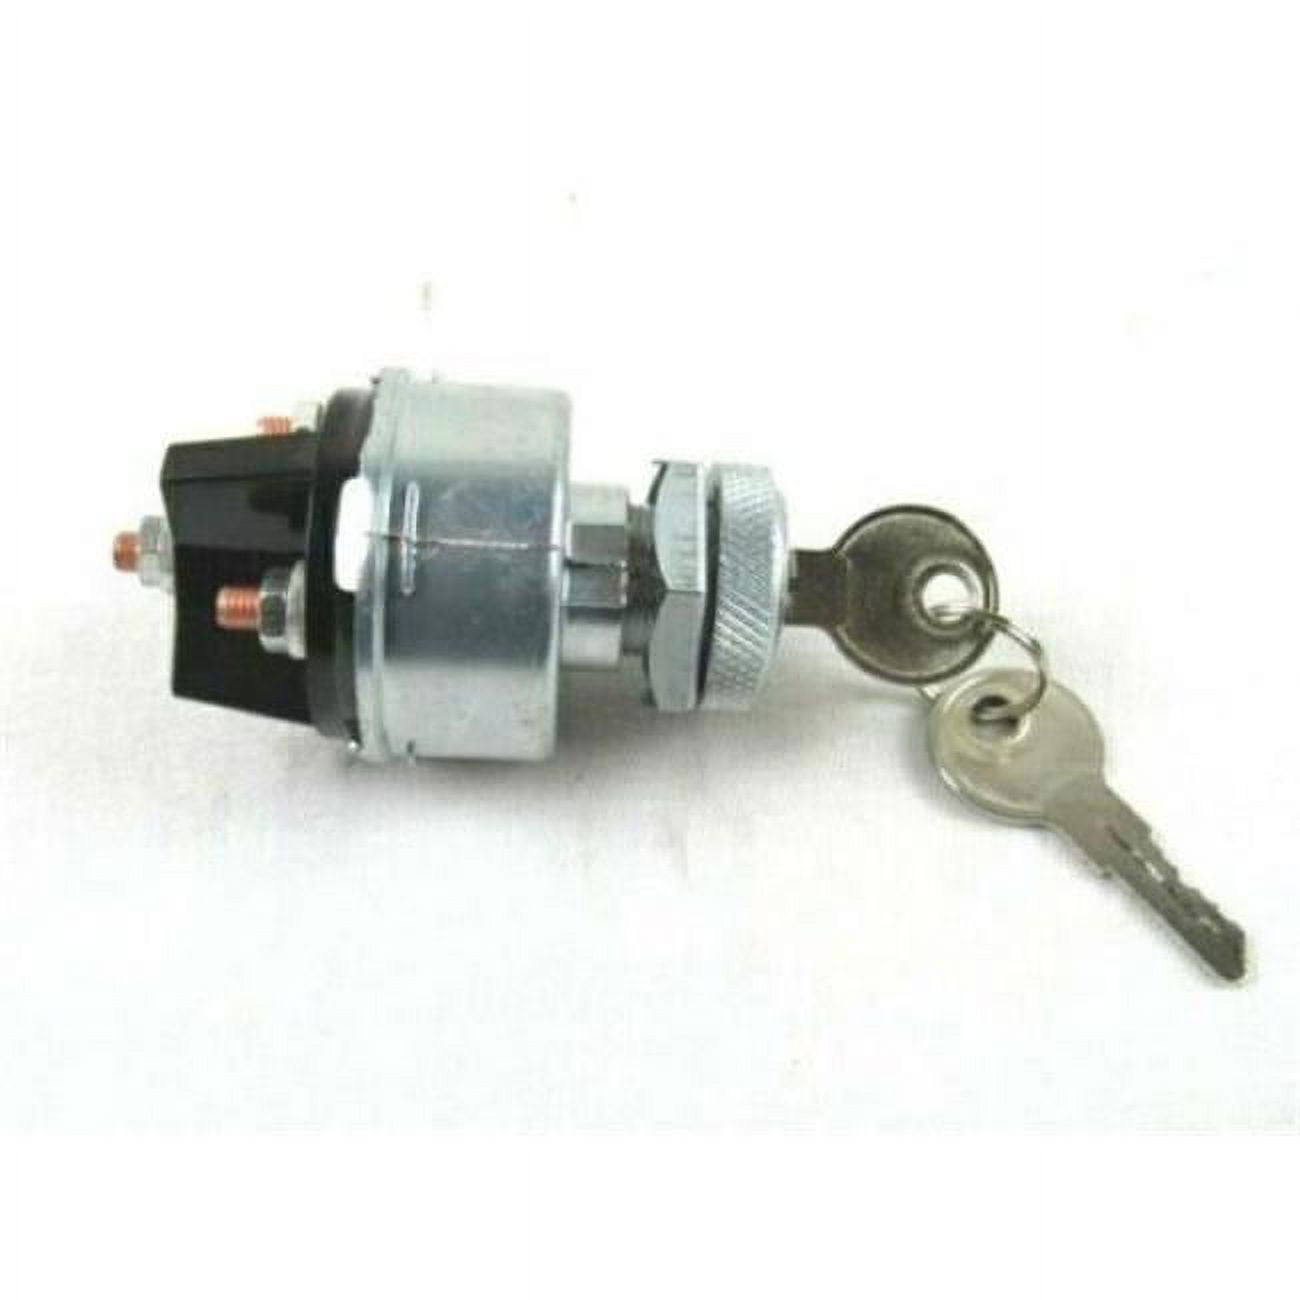 Picture of Bous Performance D31202 Ignition Switch with 2 Keys for GM Chevy Street Rod